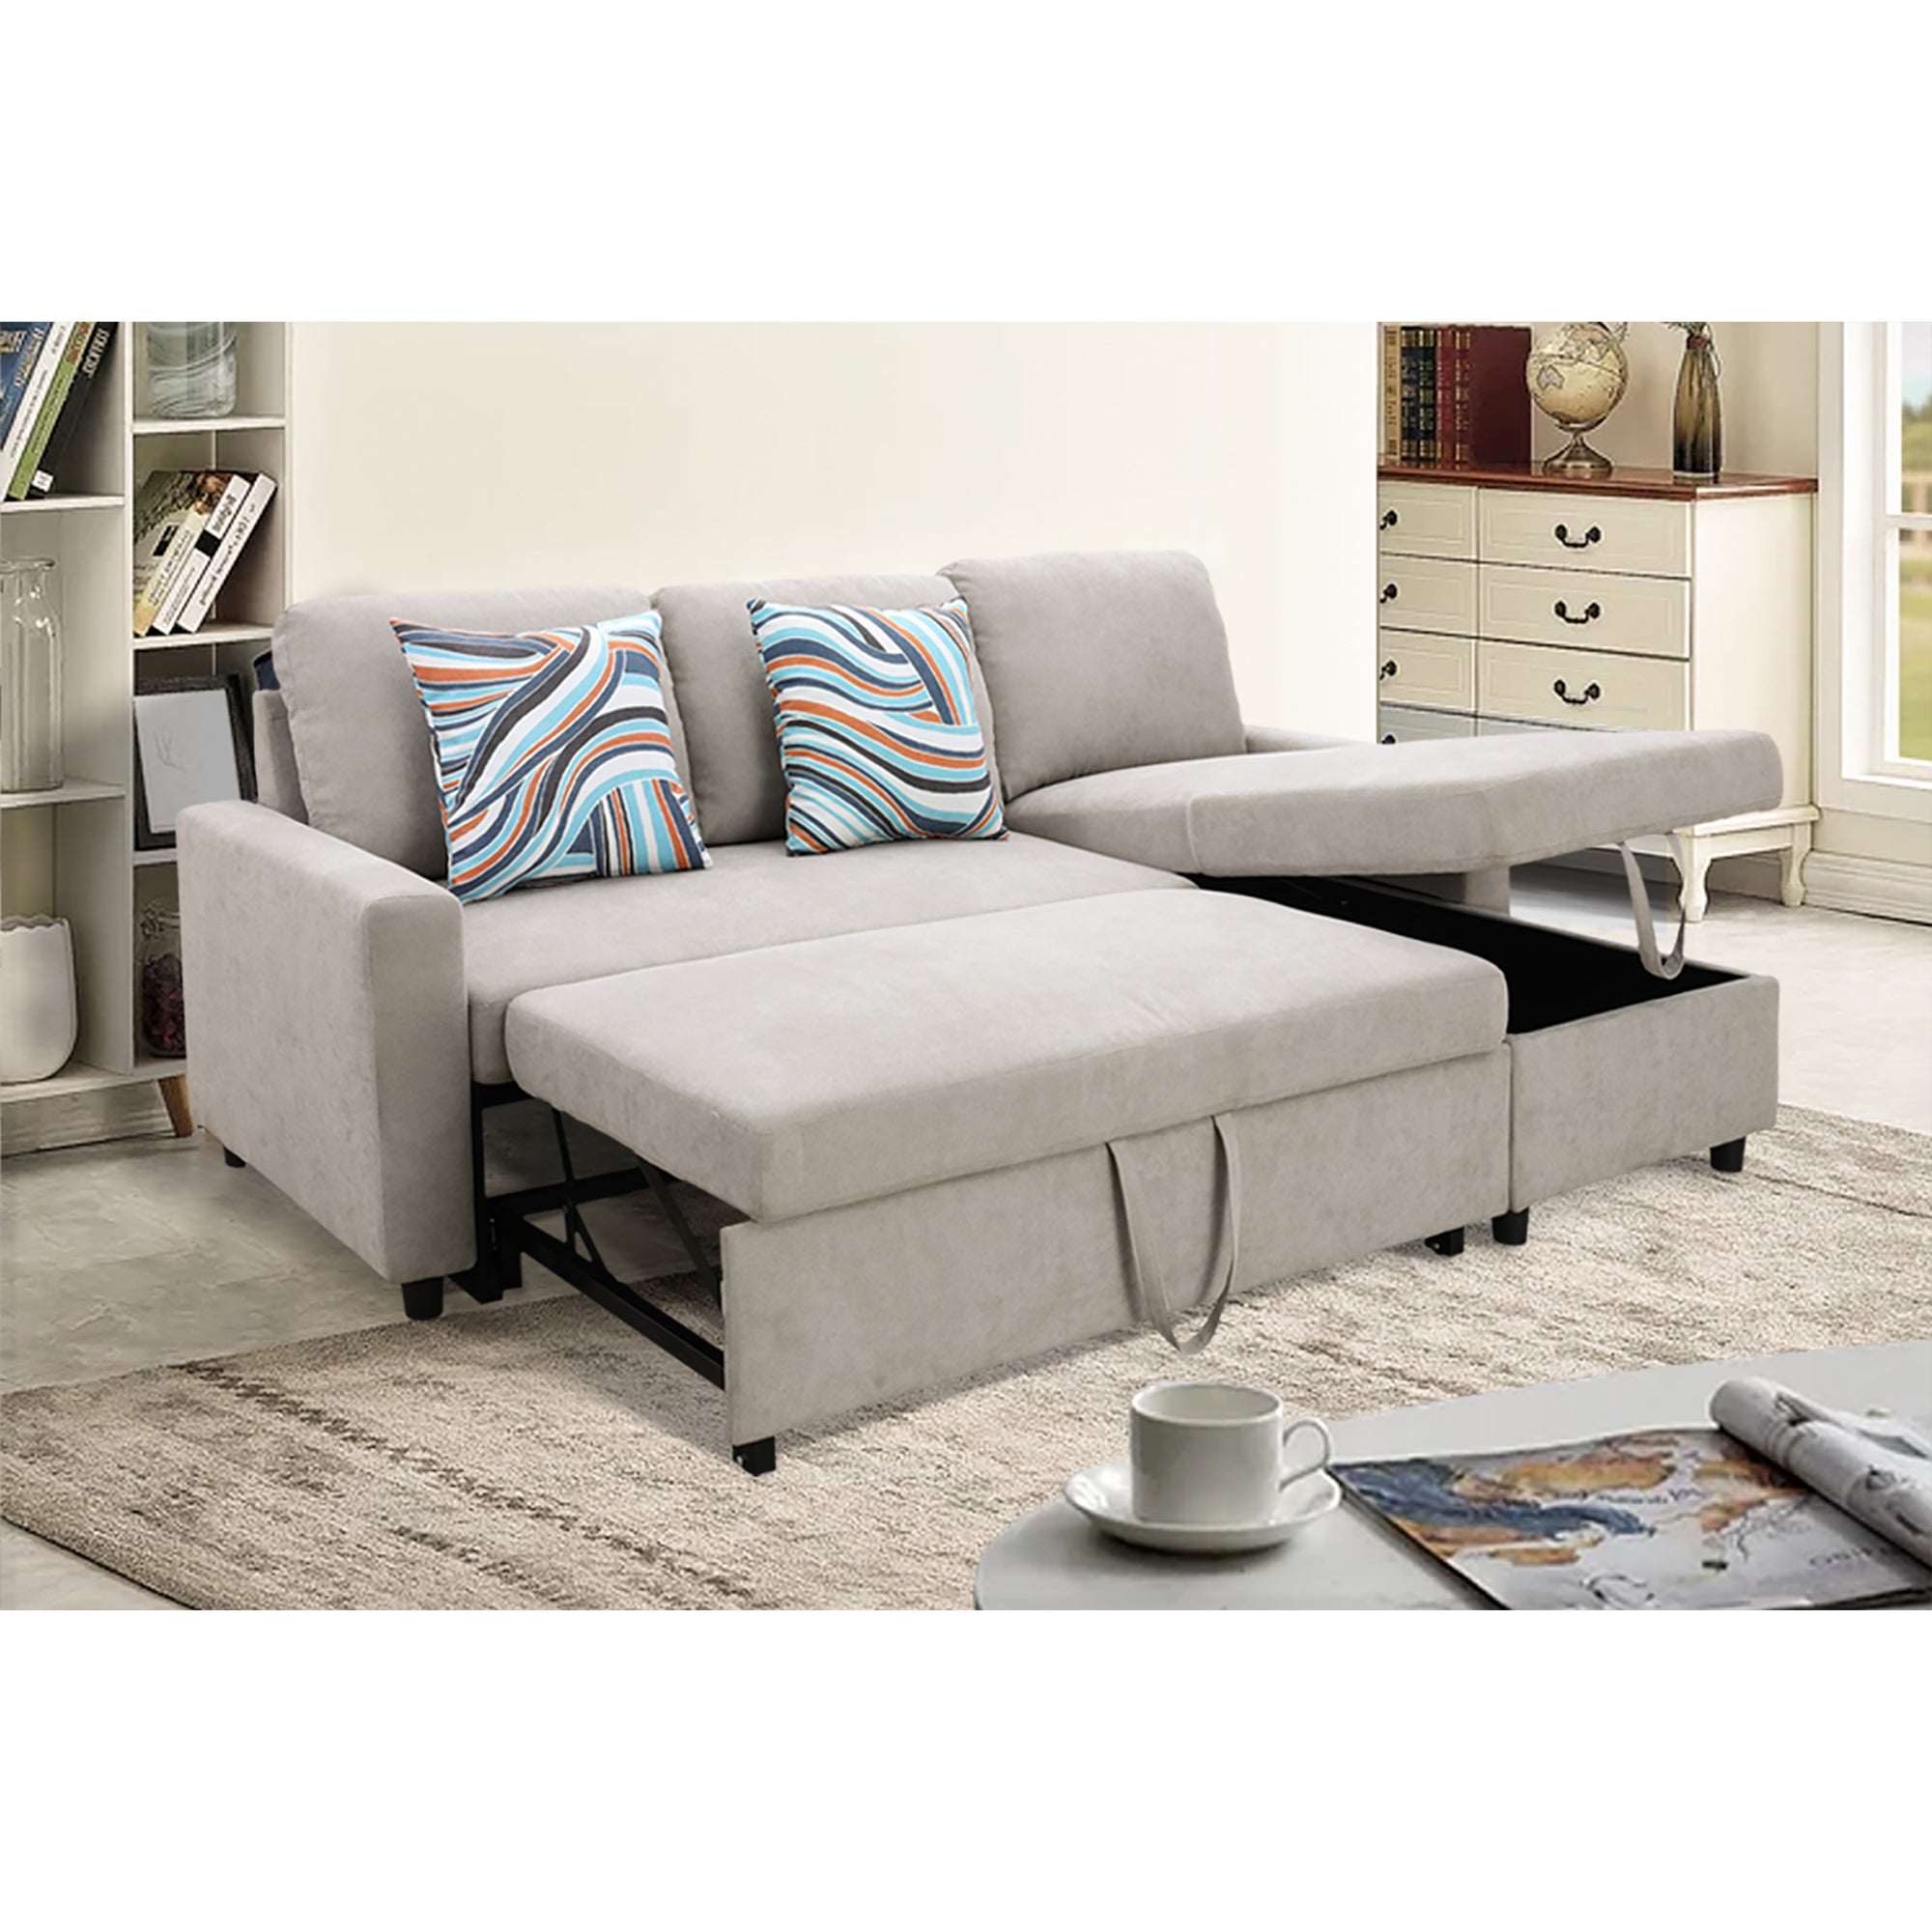 Ainehome Grey Flannelette L-Shaped Sofa bed